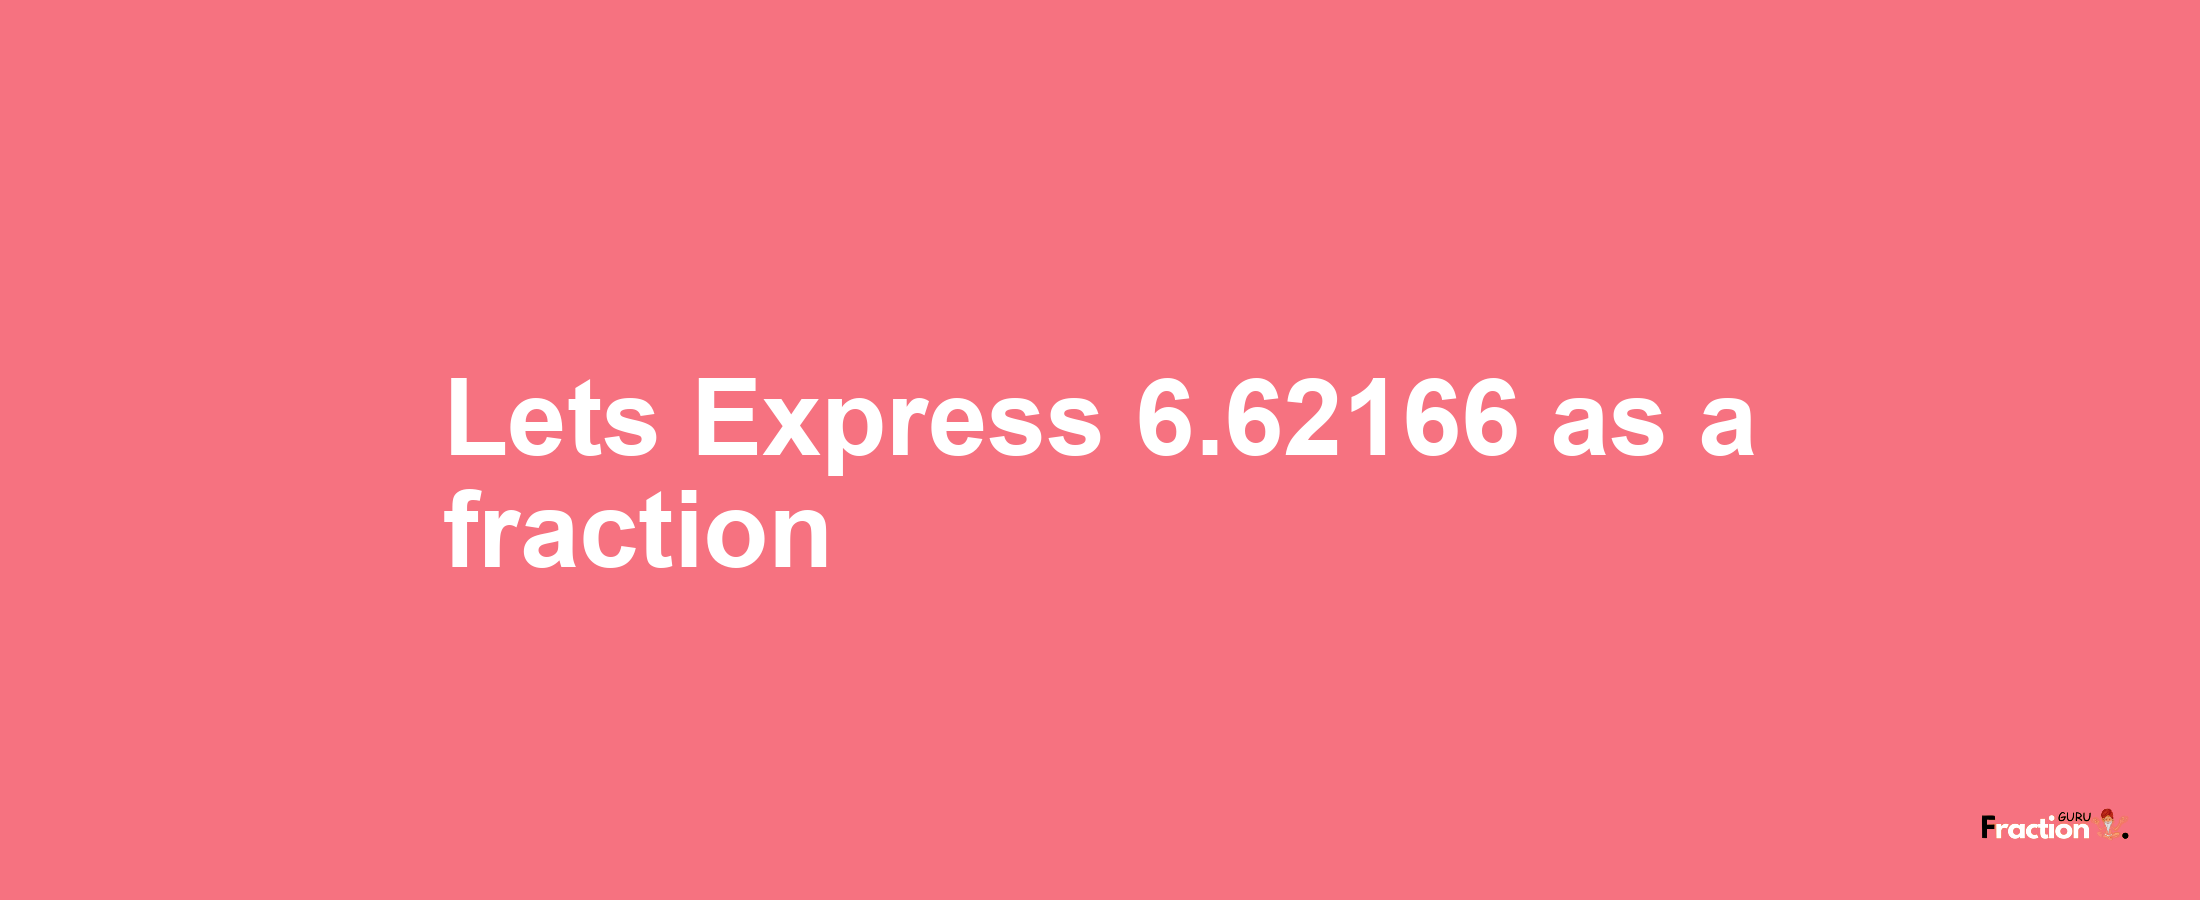 Lets Express 6.62166 as afraction